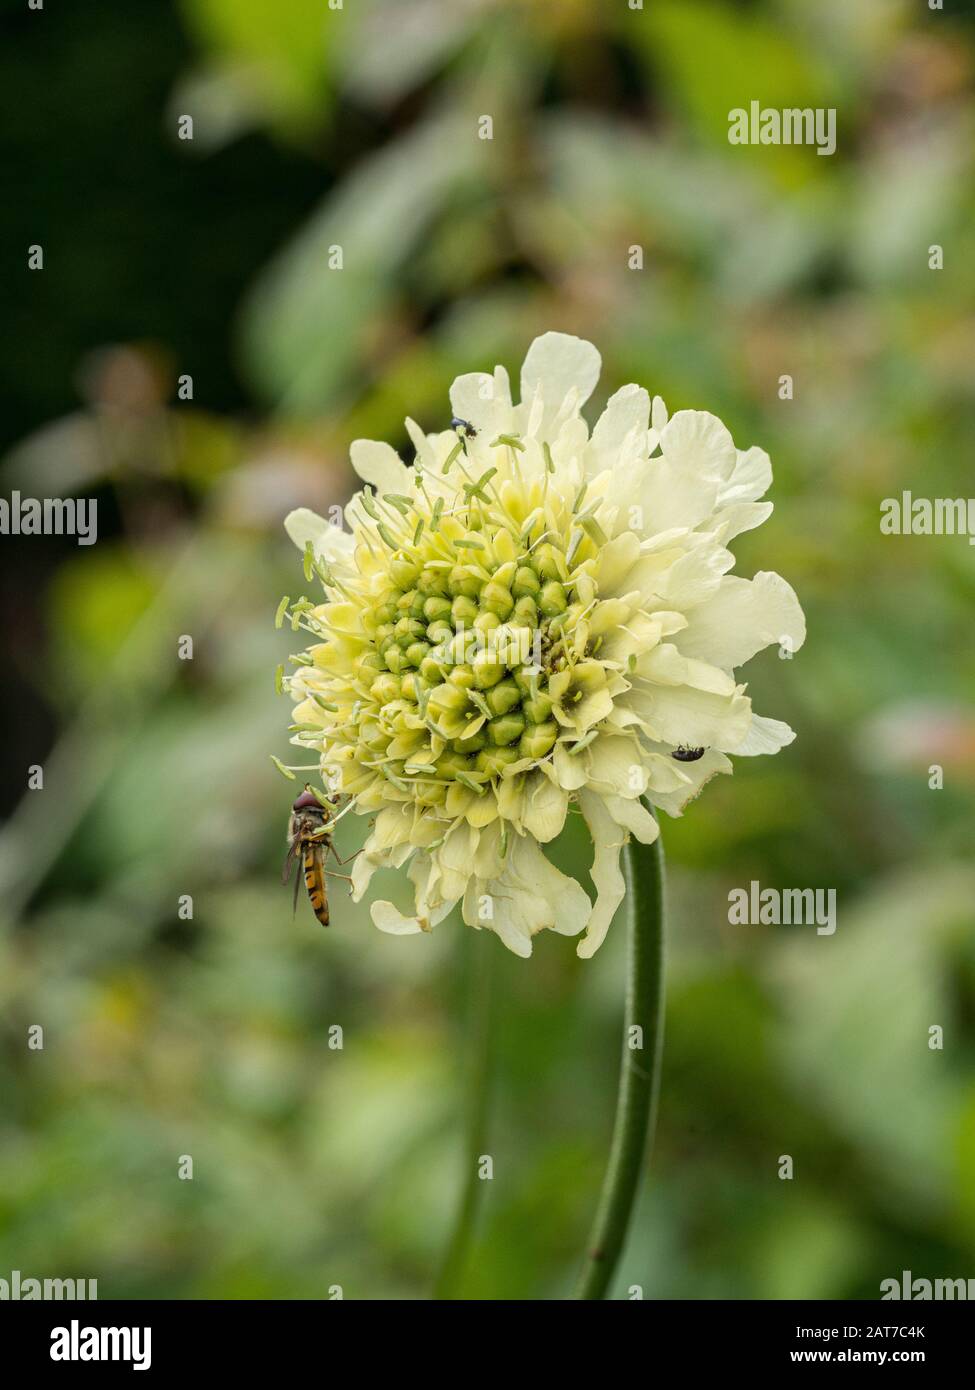 A close up of a single pale yellow flower of Cephalaria gigantea the giant scabious with a feeding hoverfly Stock Photo